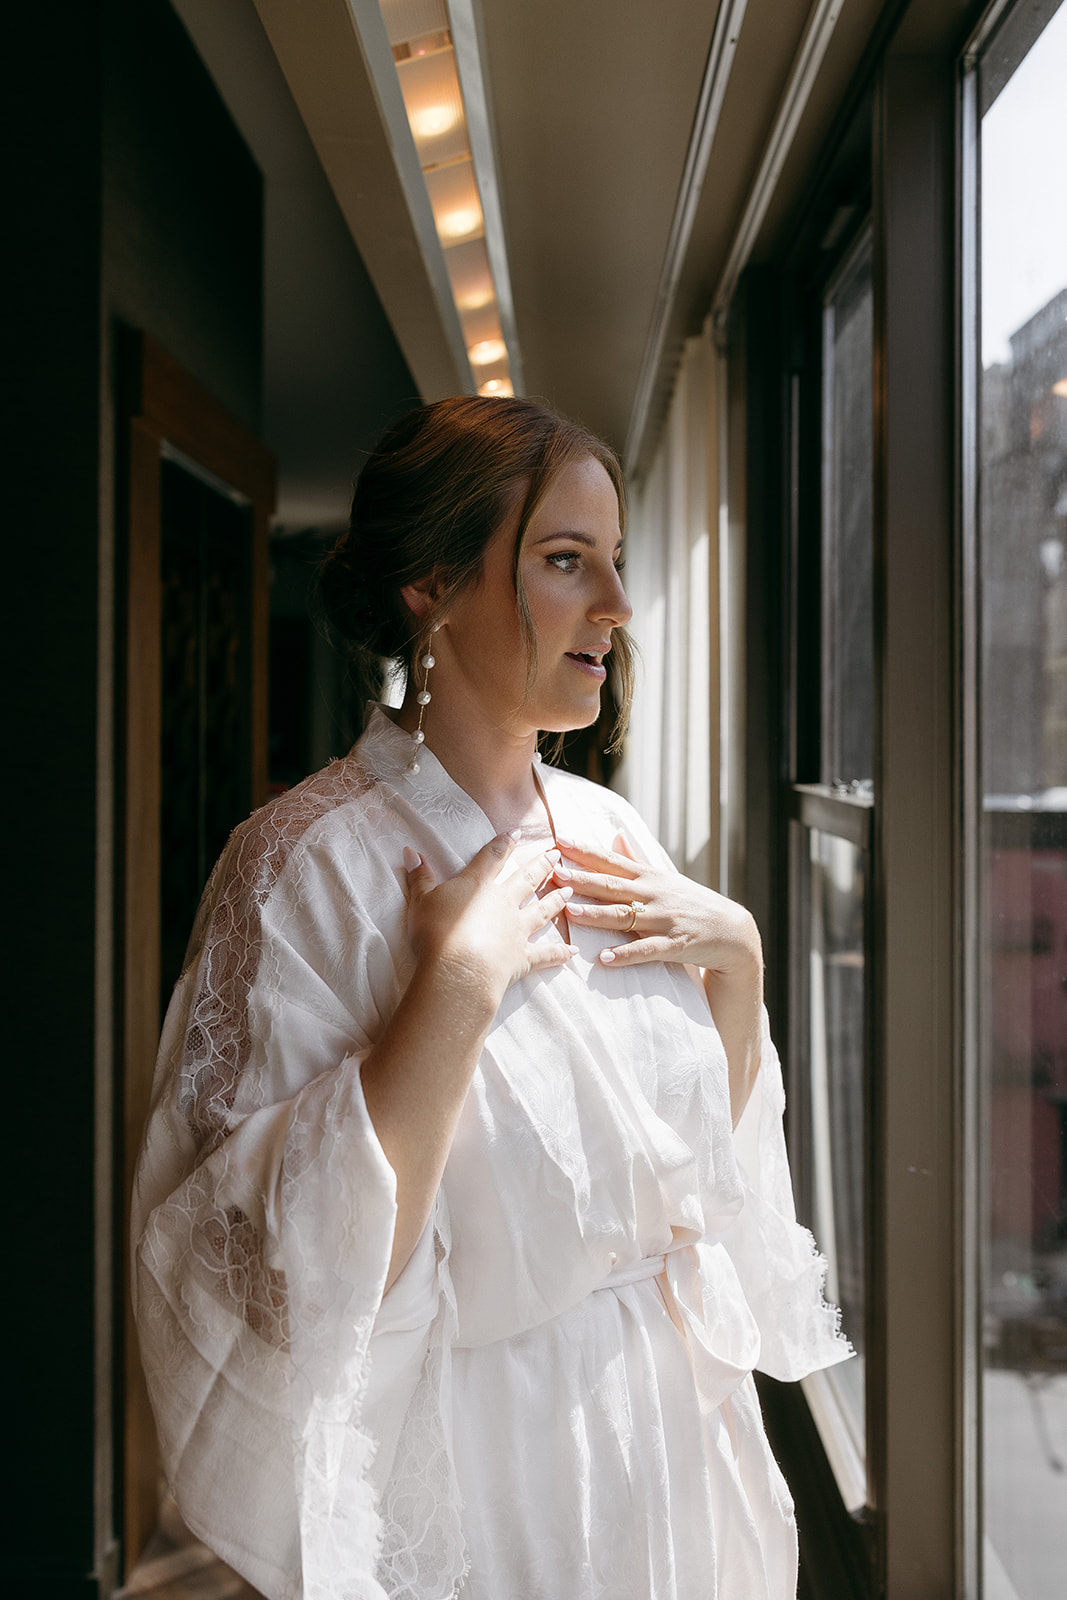 A bride gets ready for her wedding day at The Roxy